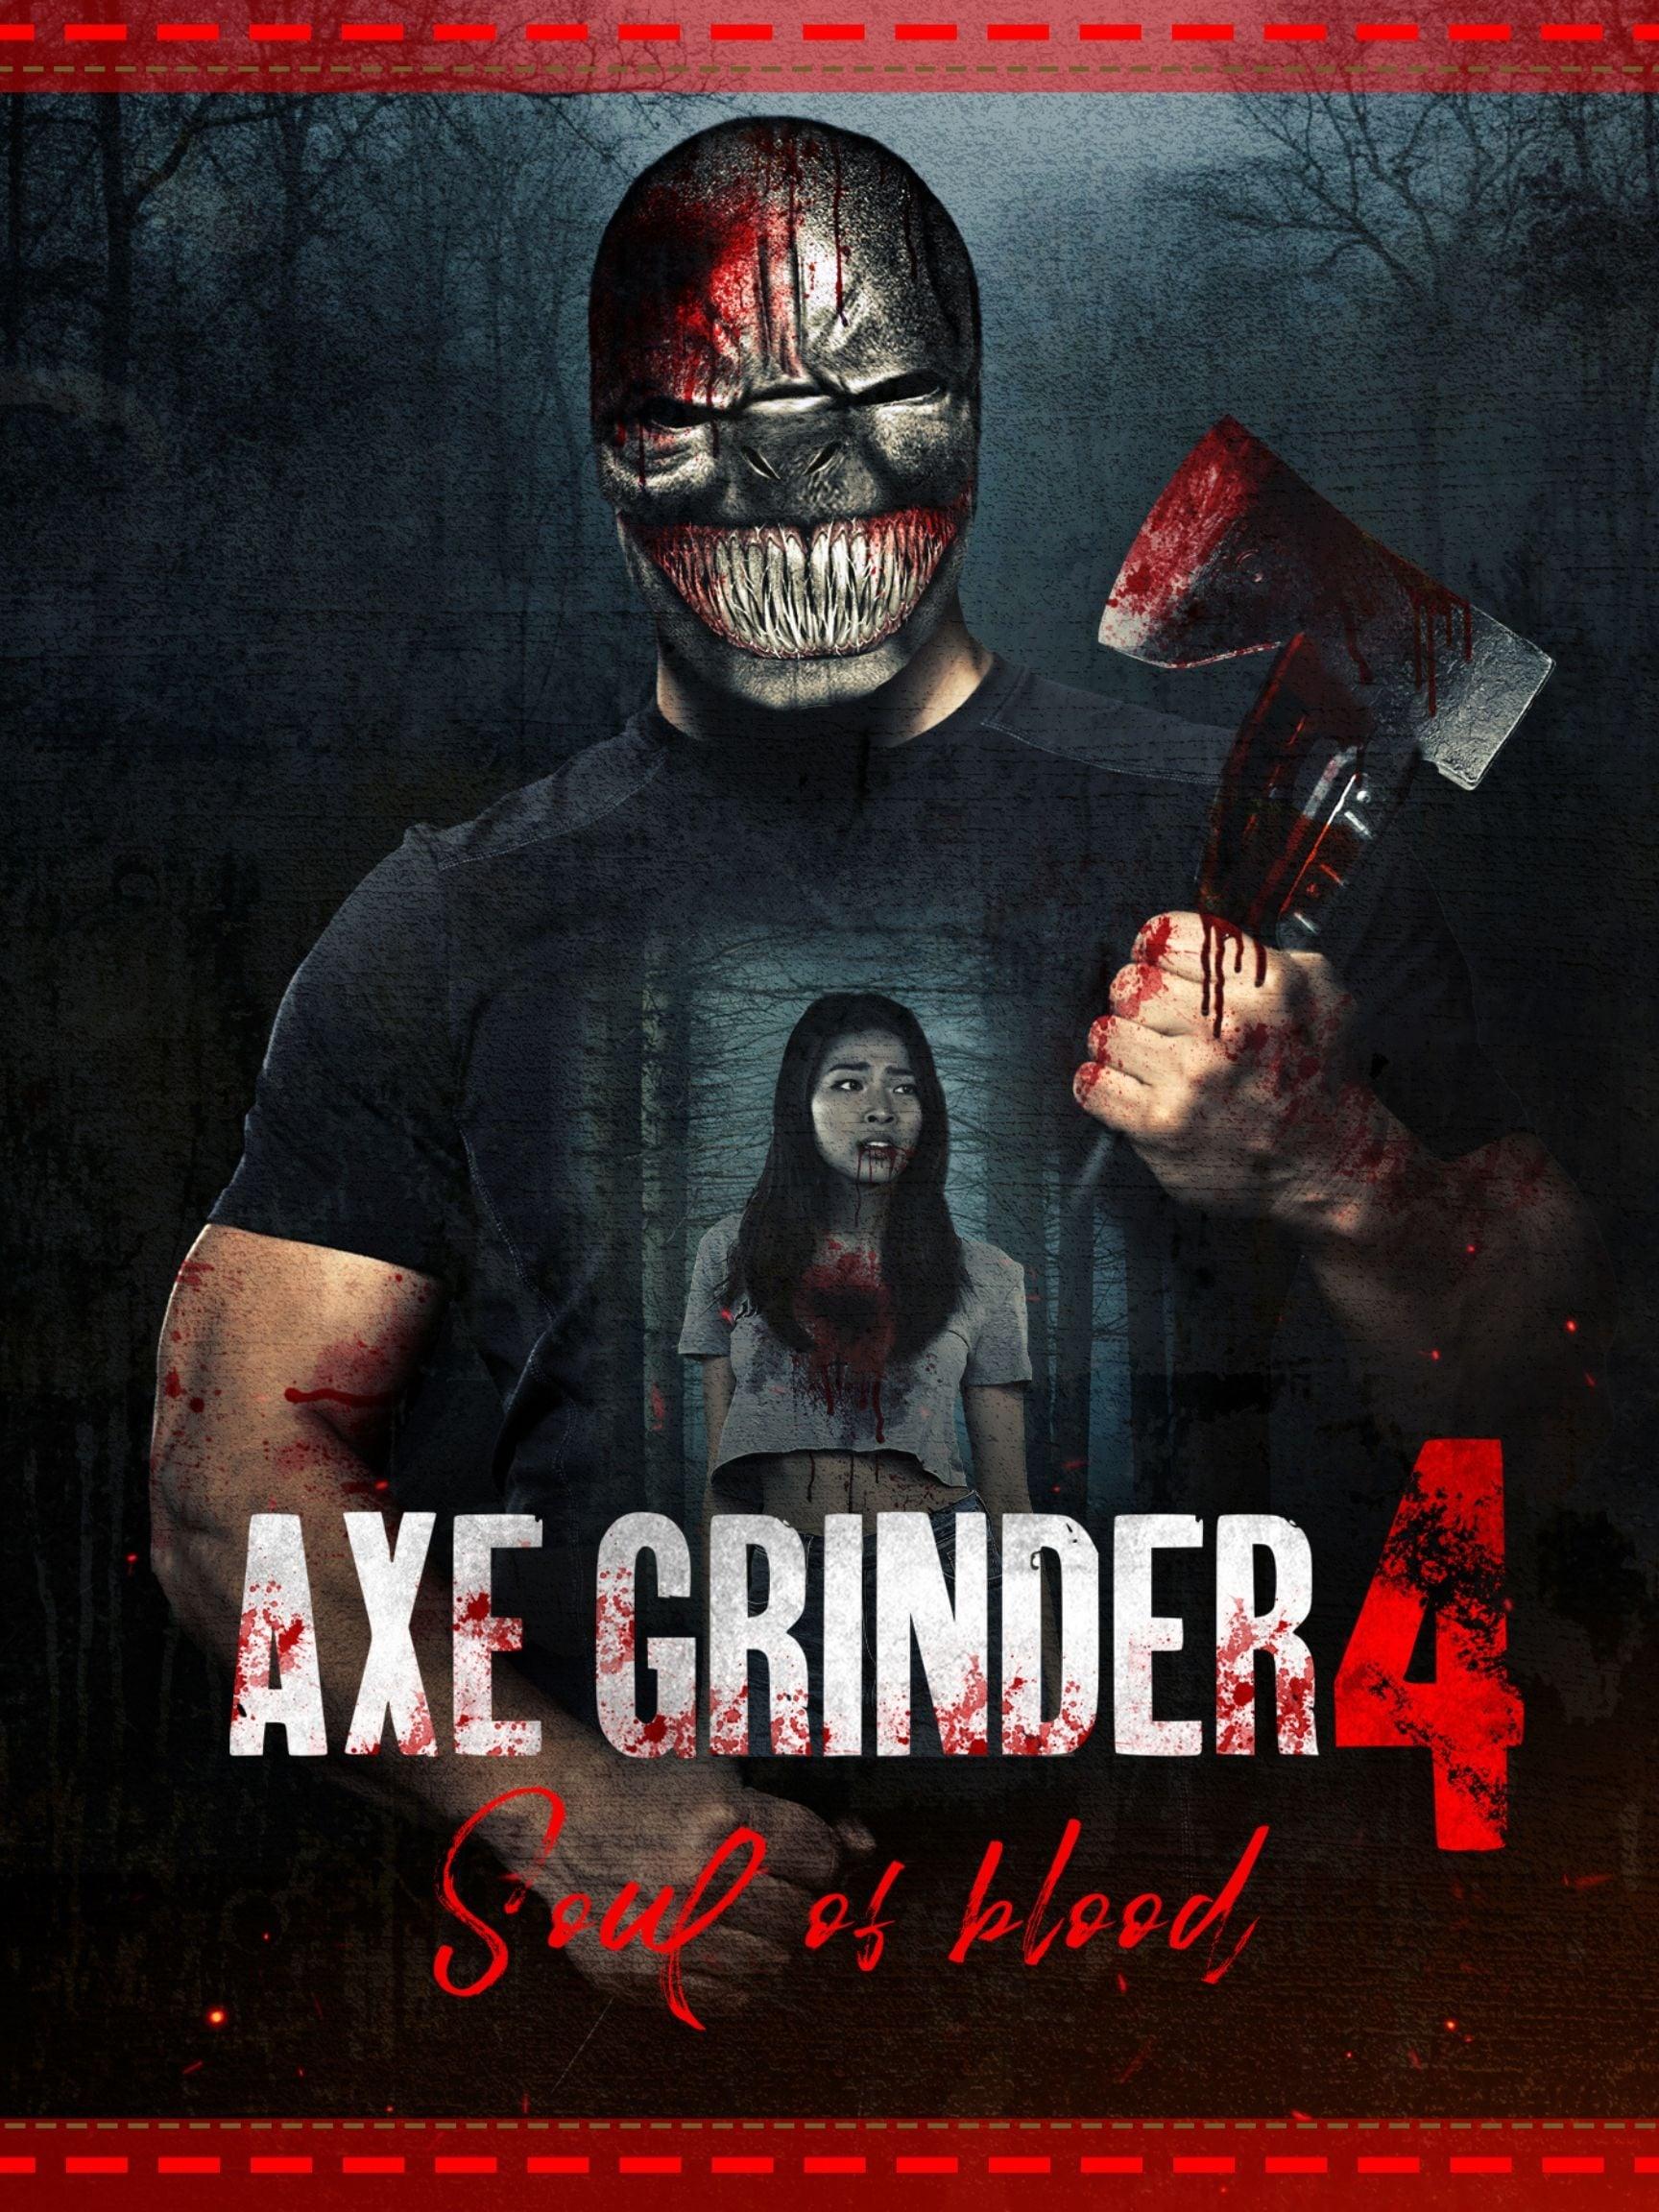 Axegrinder 4: Souls of Blood poster